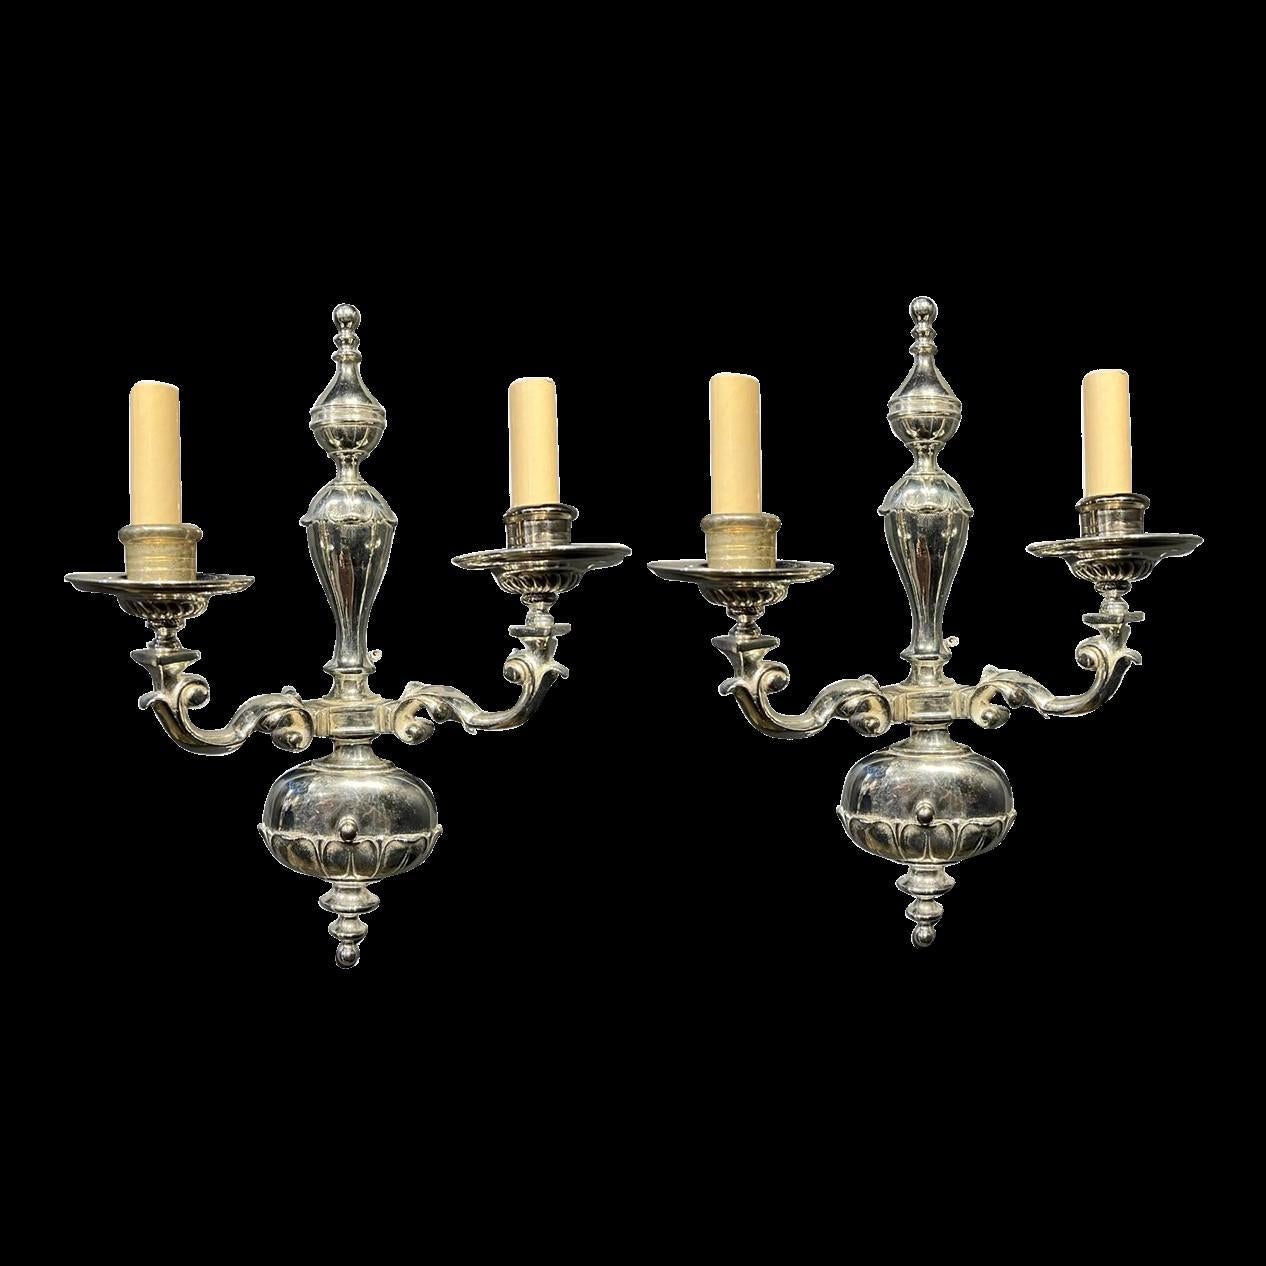 A pair of circa 1920's Caldwell silver plated sconces with two lights. Original finish.